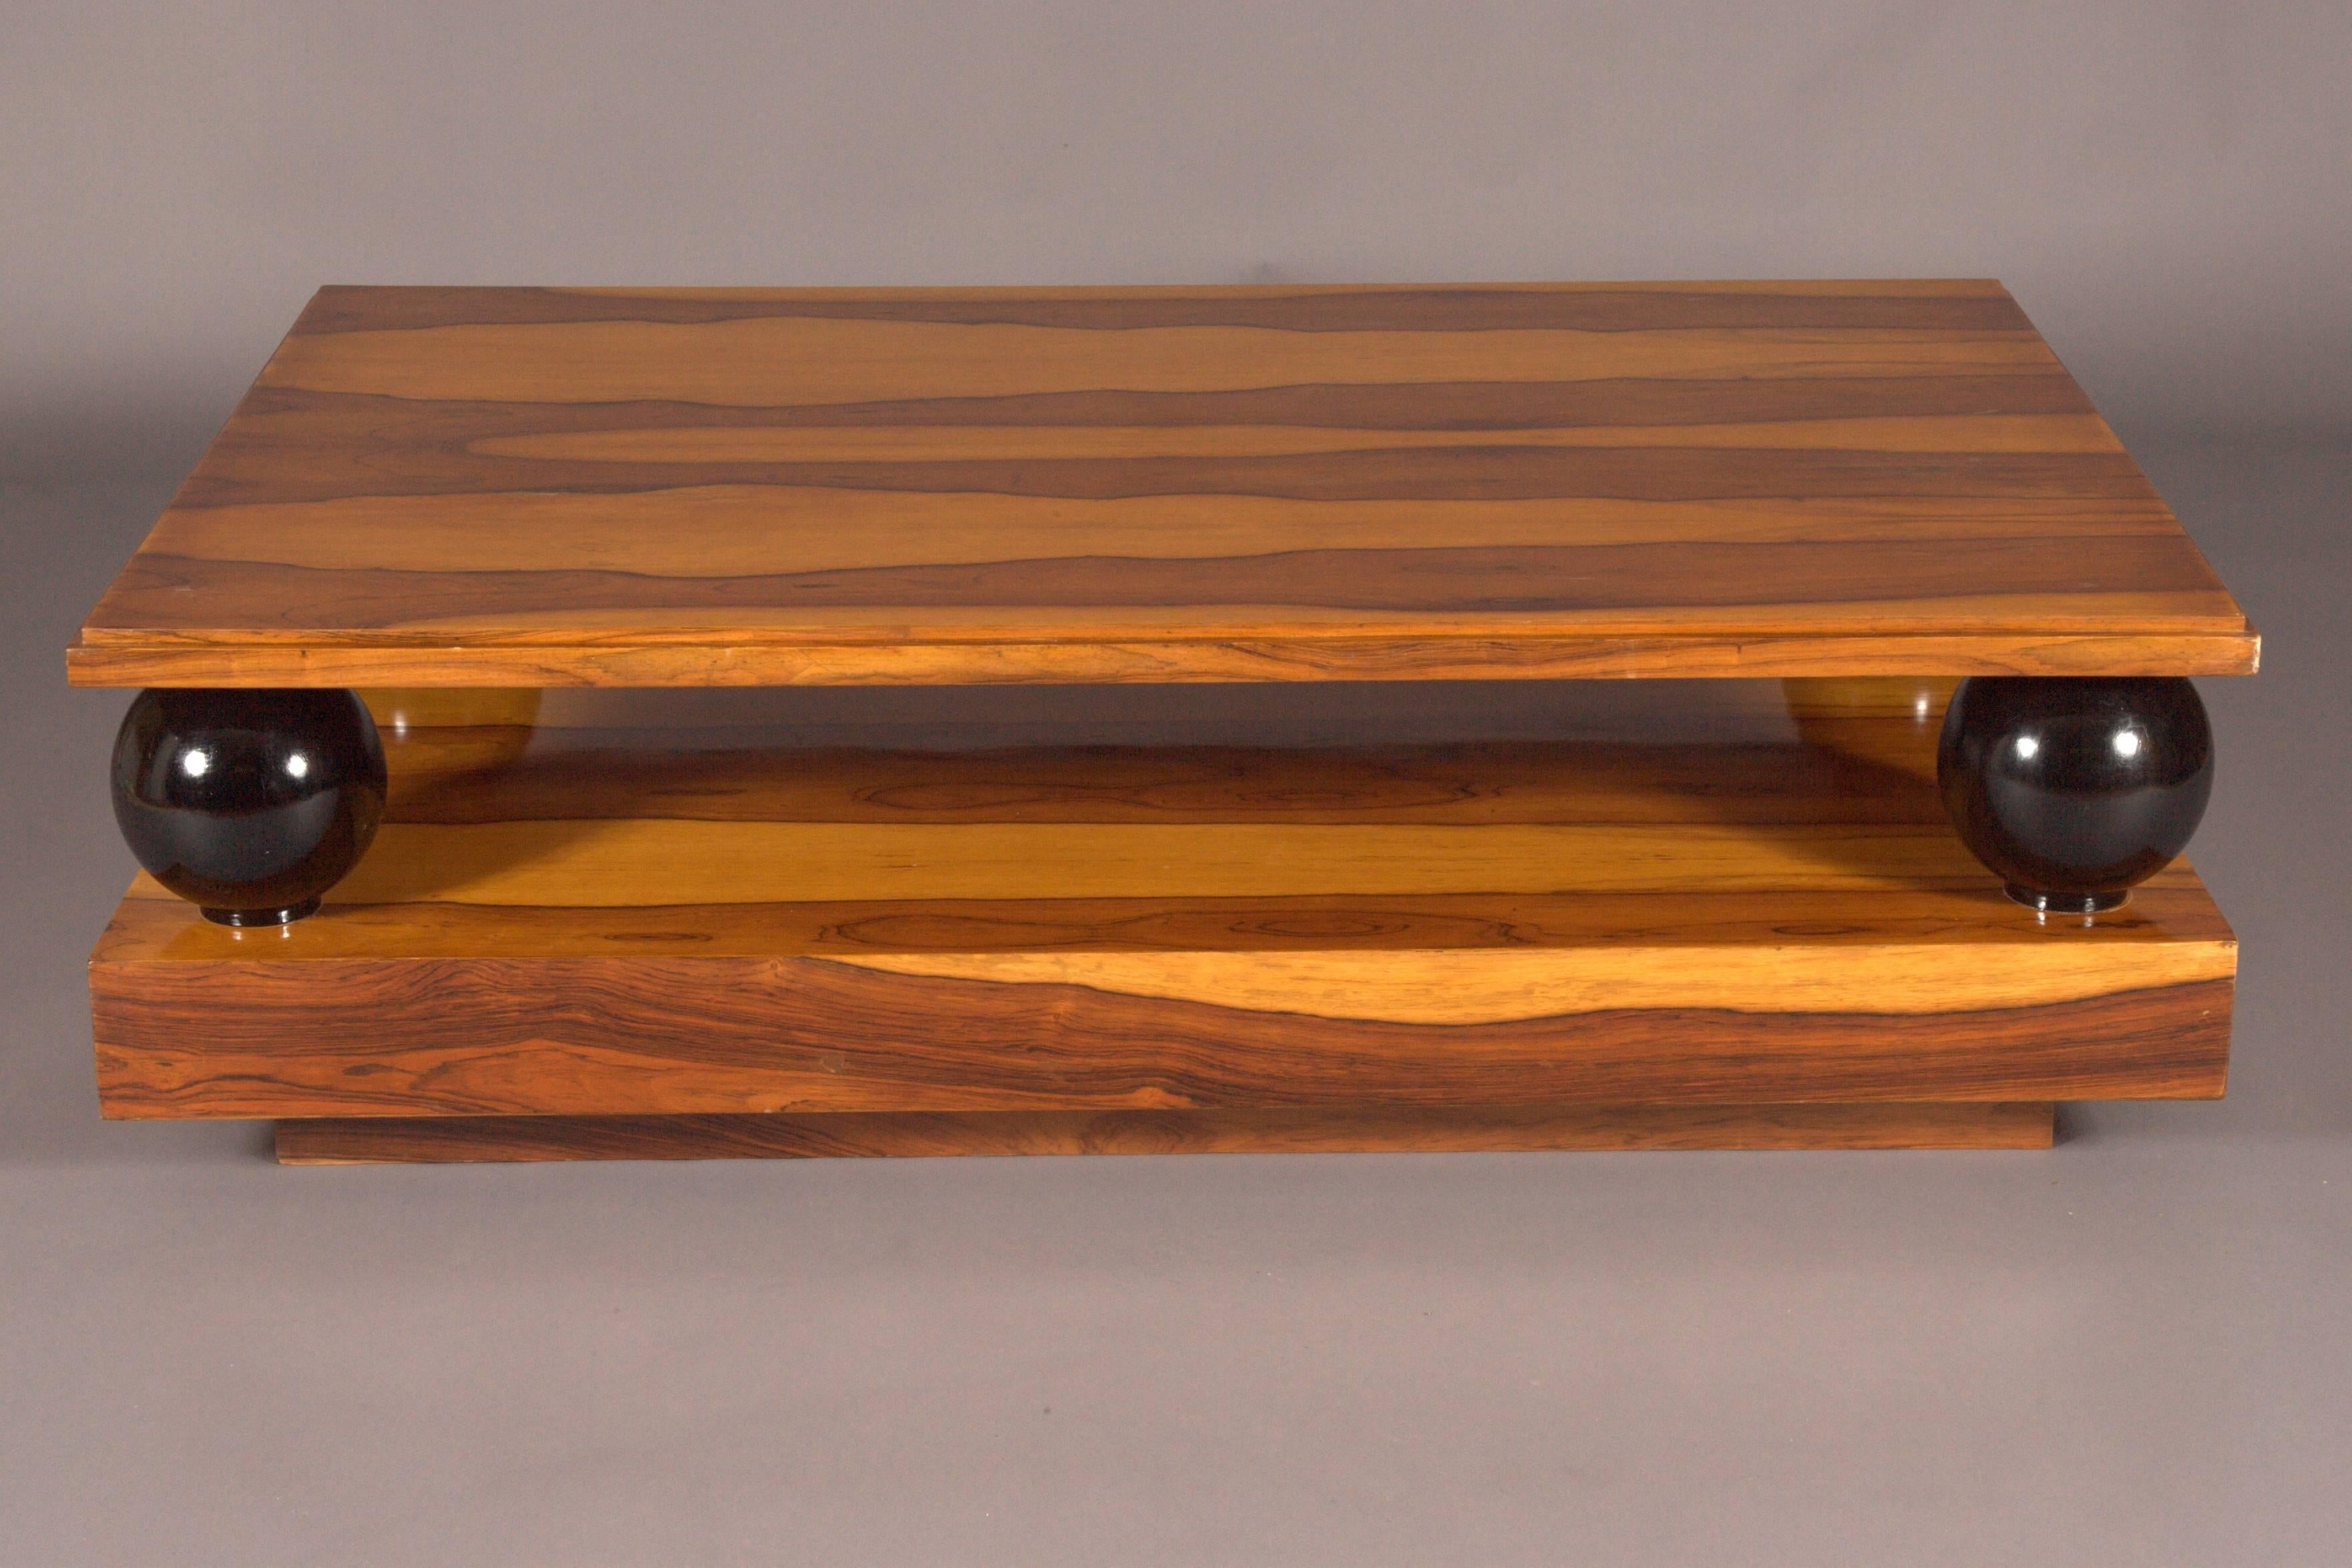 exotic Indian rosewood on solid softwood. Four black-colored balls on a rectangular, stepped base plate. Straight frame base for slightly recessed table top. The floor and the table top are beautifully grained. Nice patina, with shellac hand